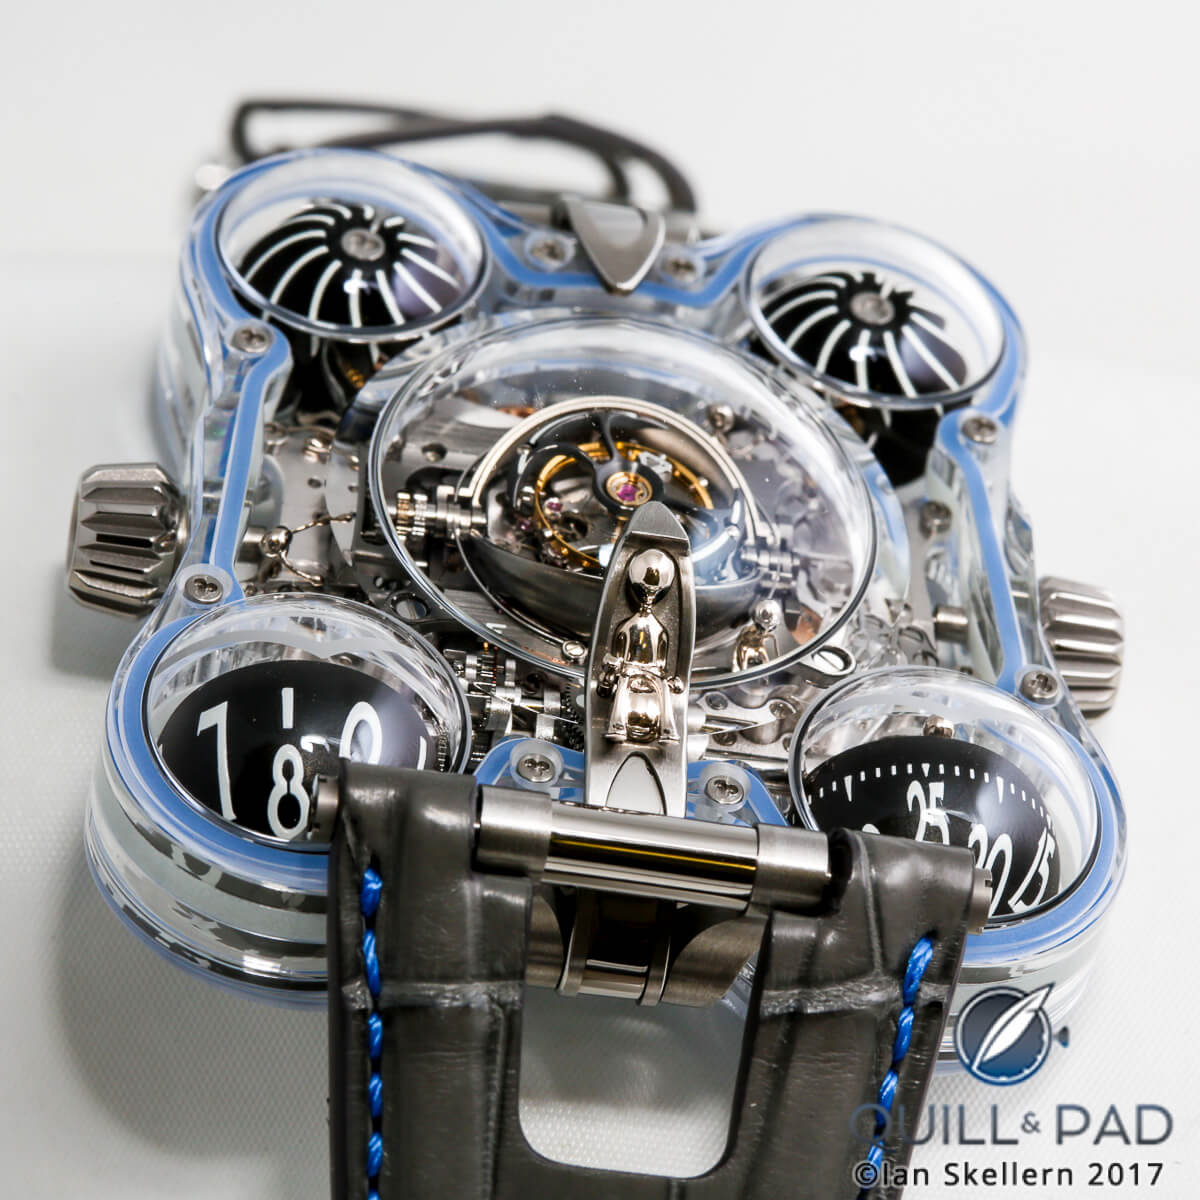 Alien in the driver's seat of MB&F HM6 Alien Nation